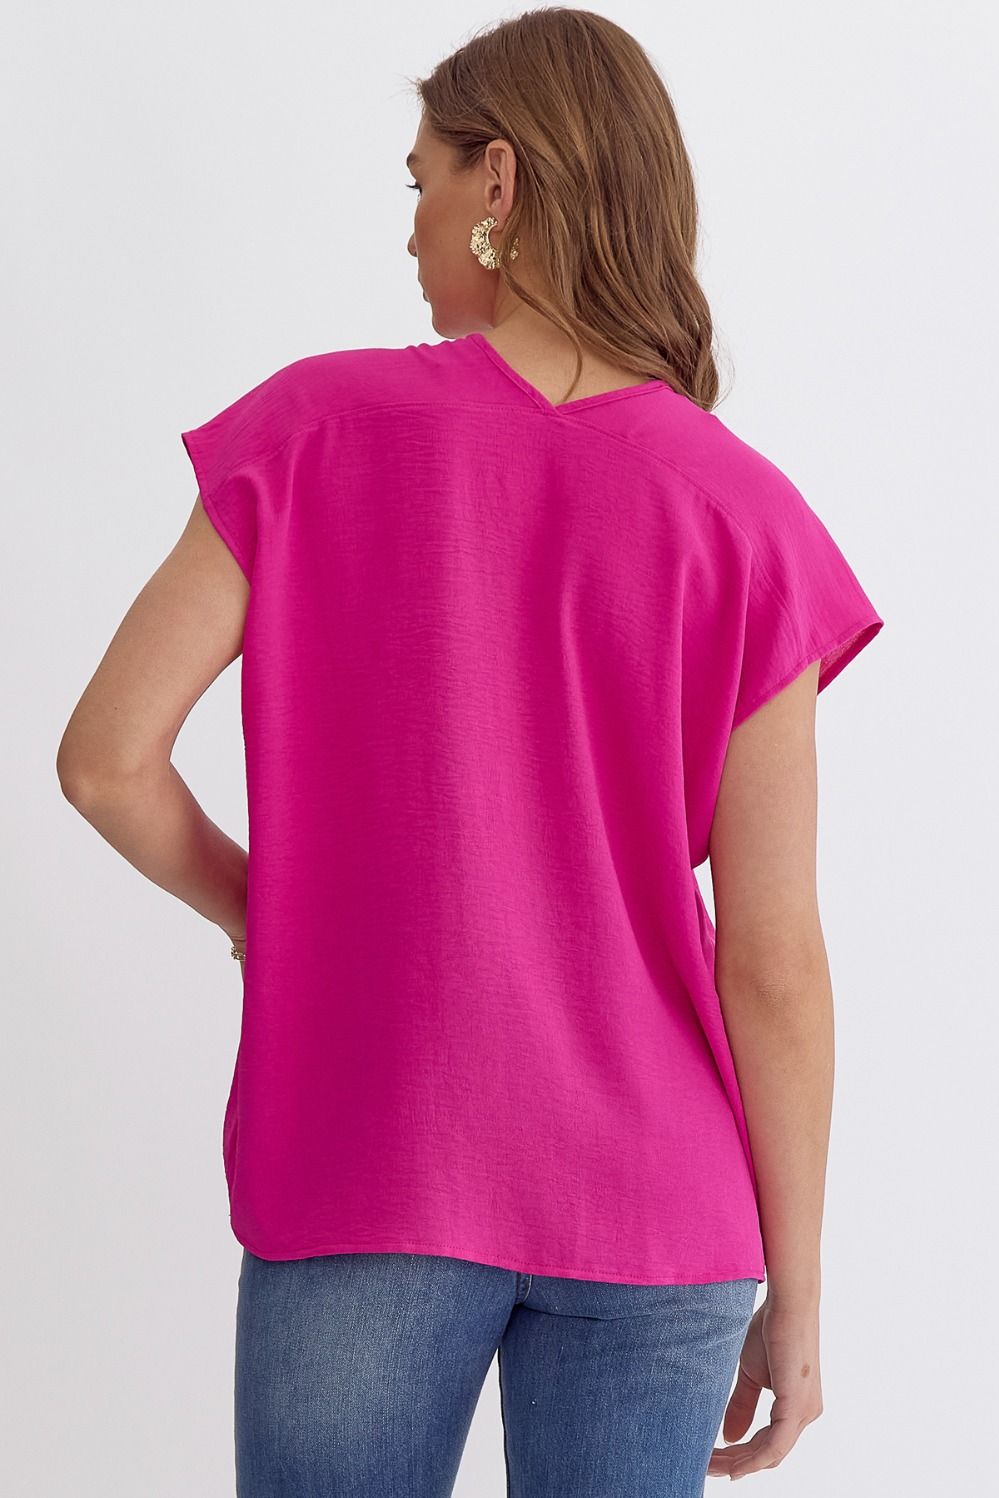 Entro | Hot Pink V-Neck Relaxed Fit Top | Sweetest Stitch Boutique